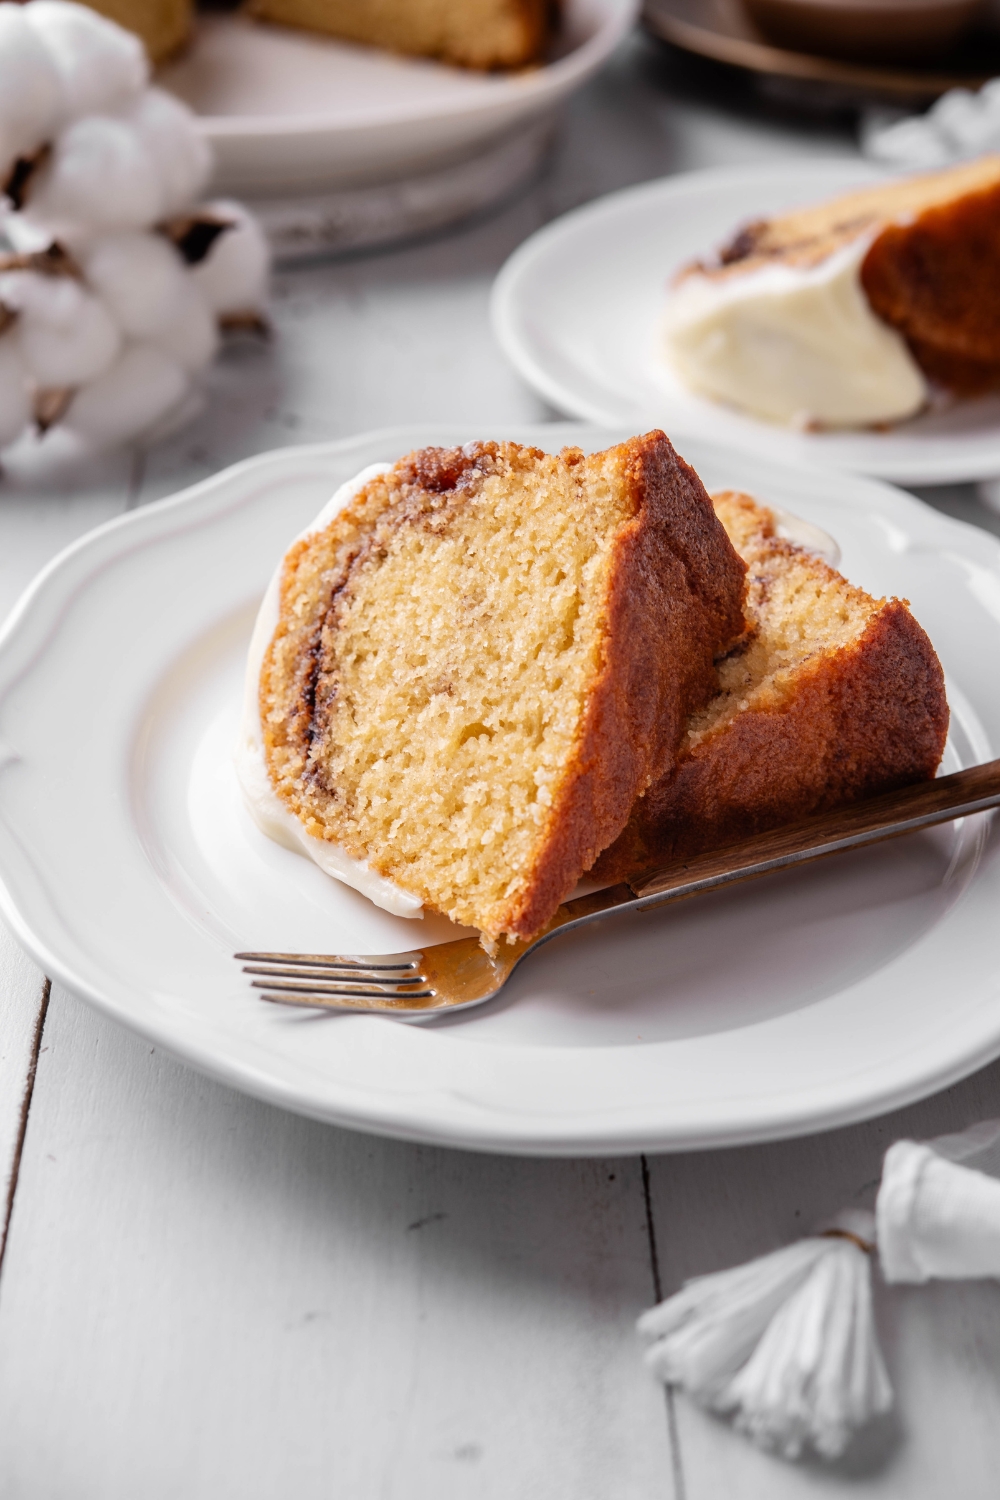 Two slices of cinnamon bundt cake rest on a white plate. There is a fork nearby.